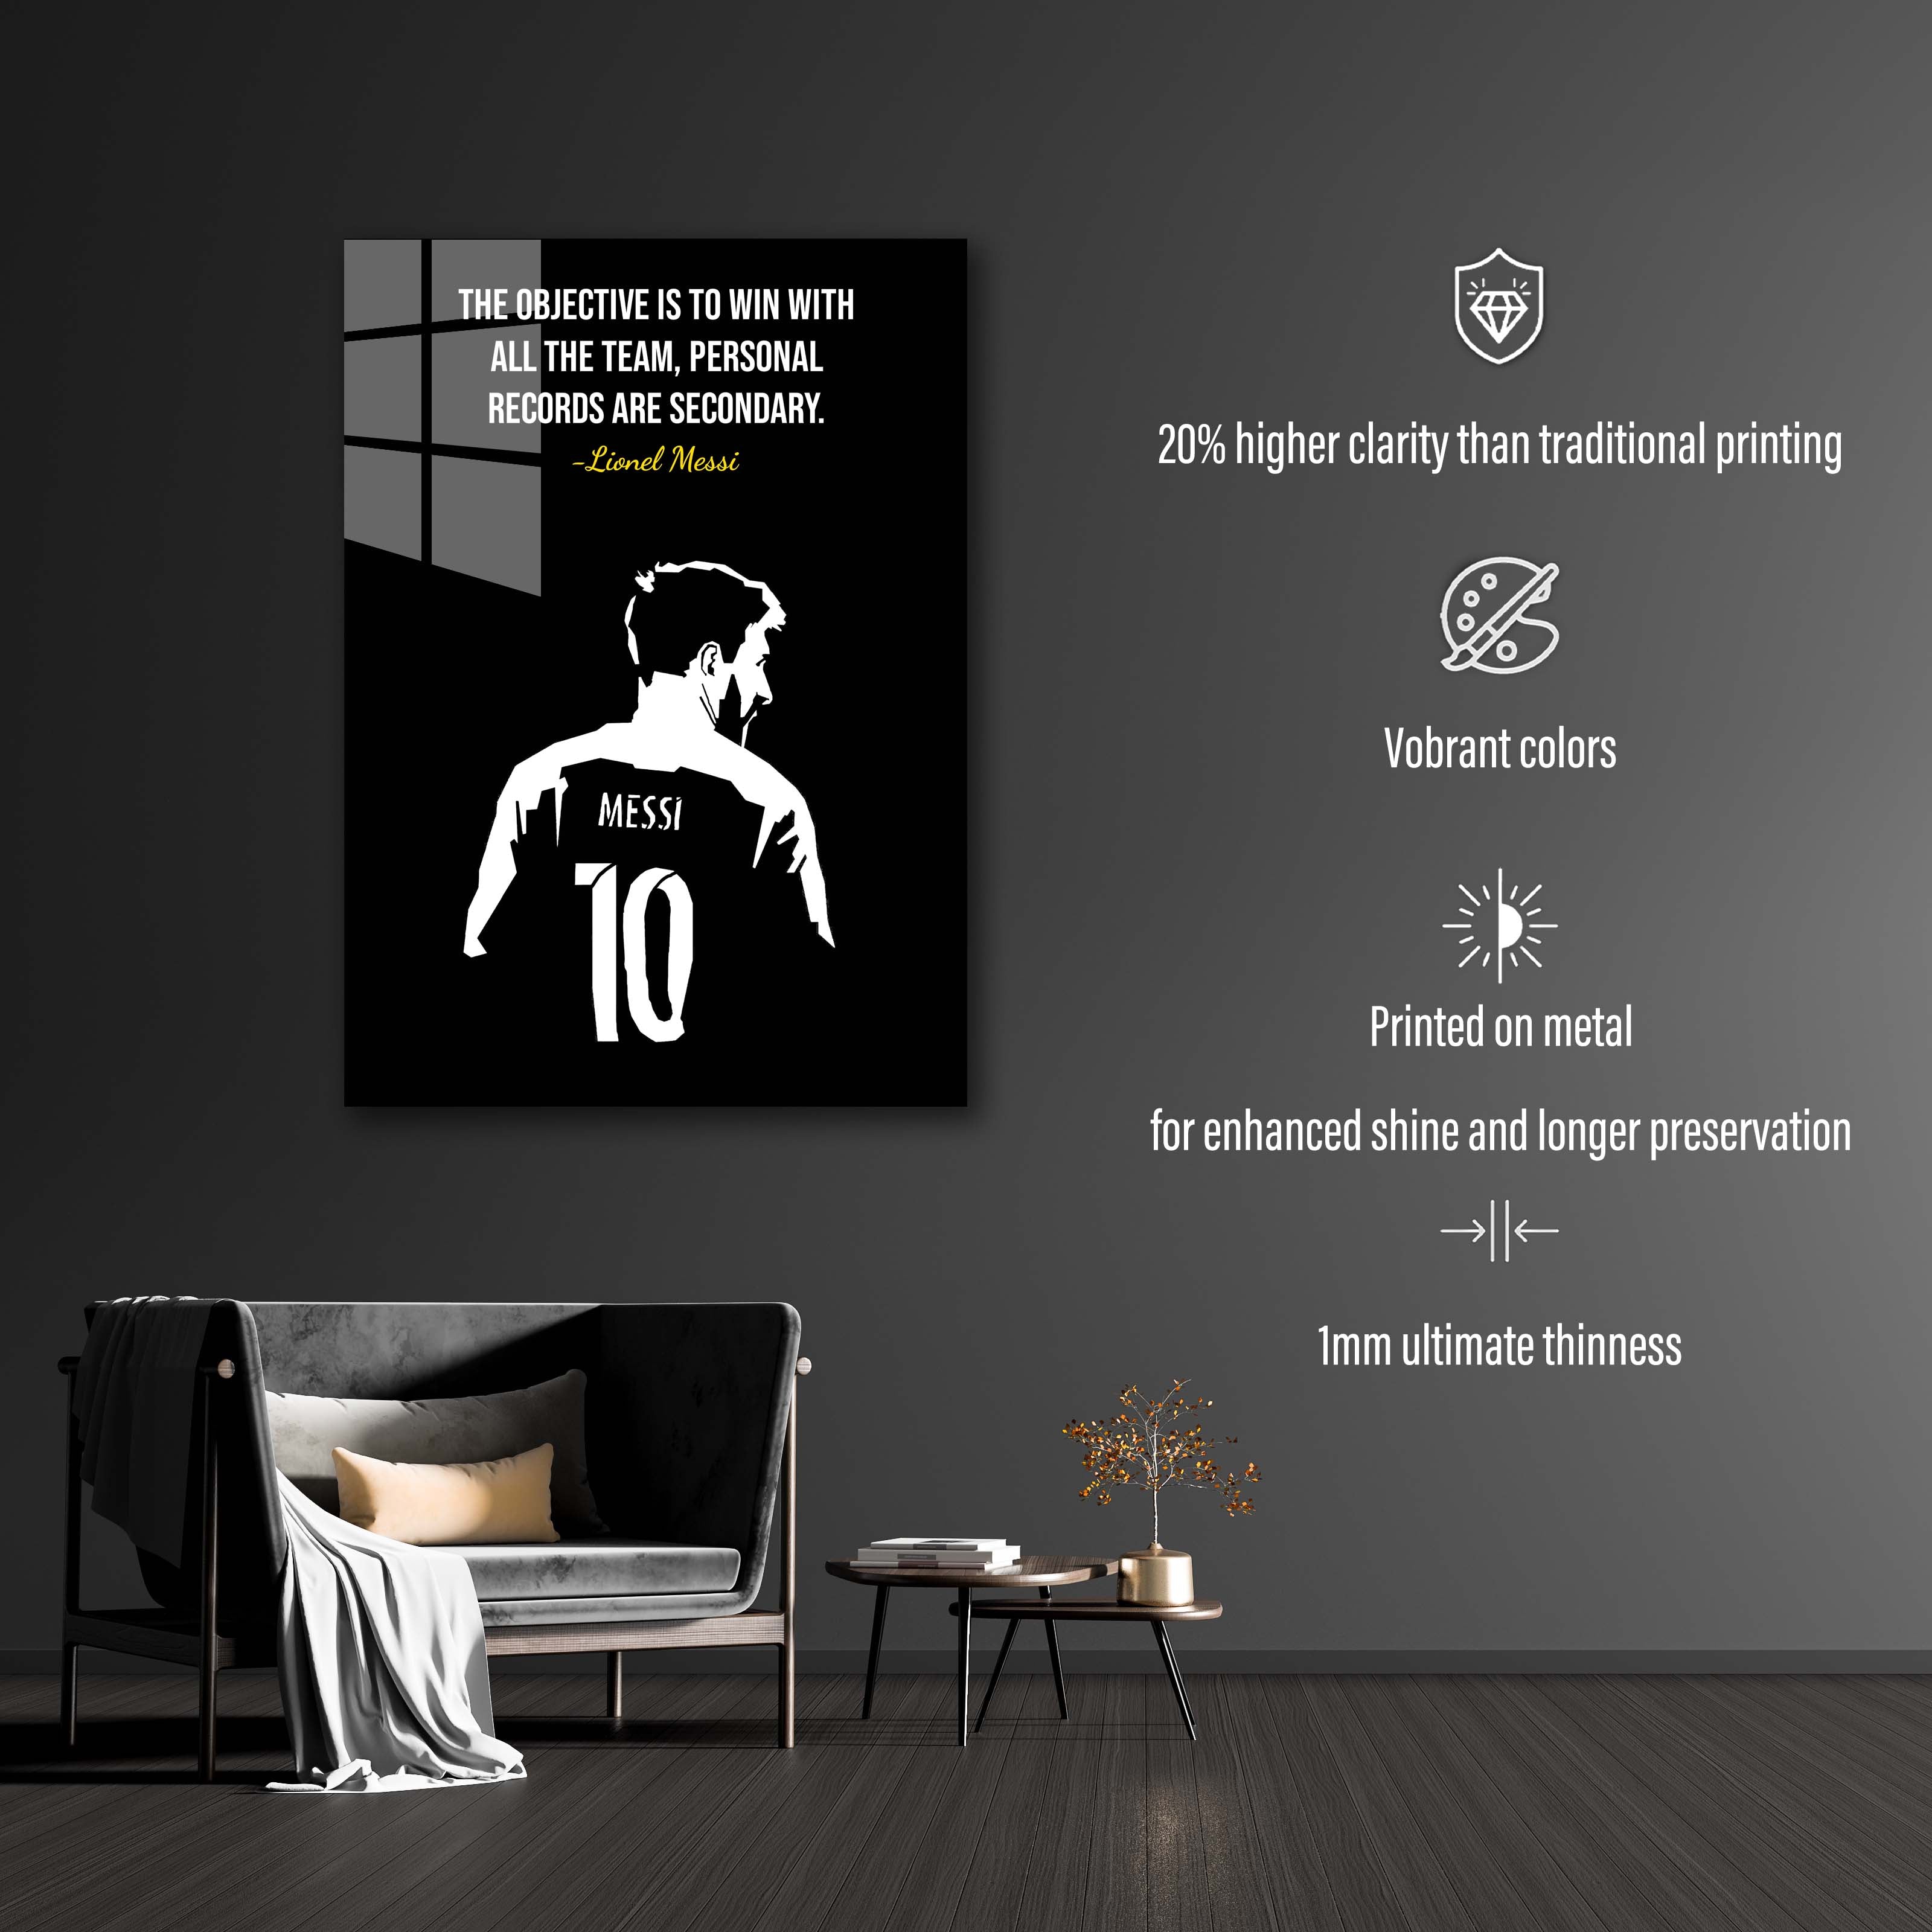 Lionel Messi Football quotes -designed by @Pus Meong art